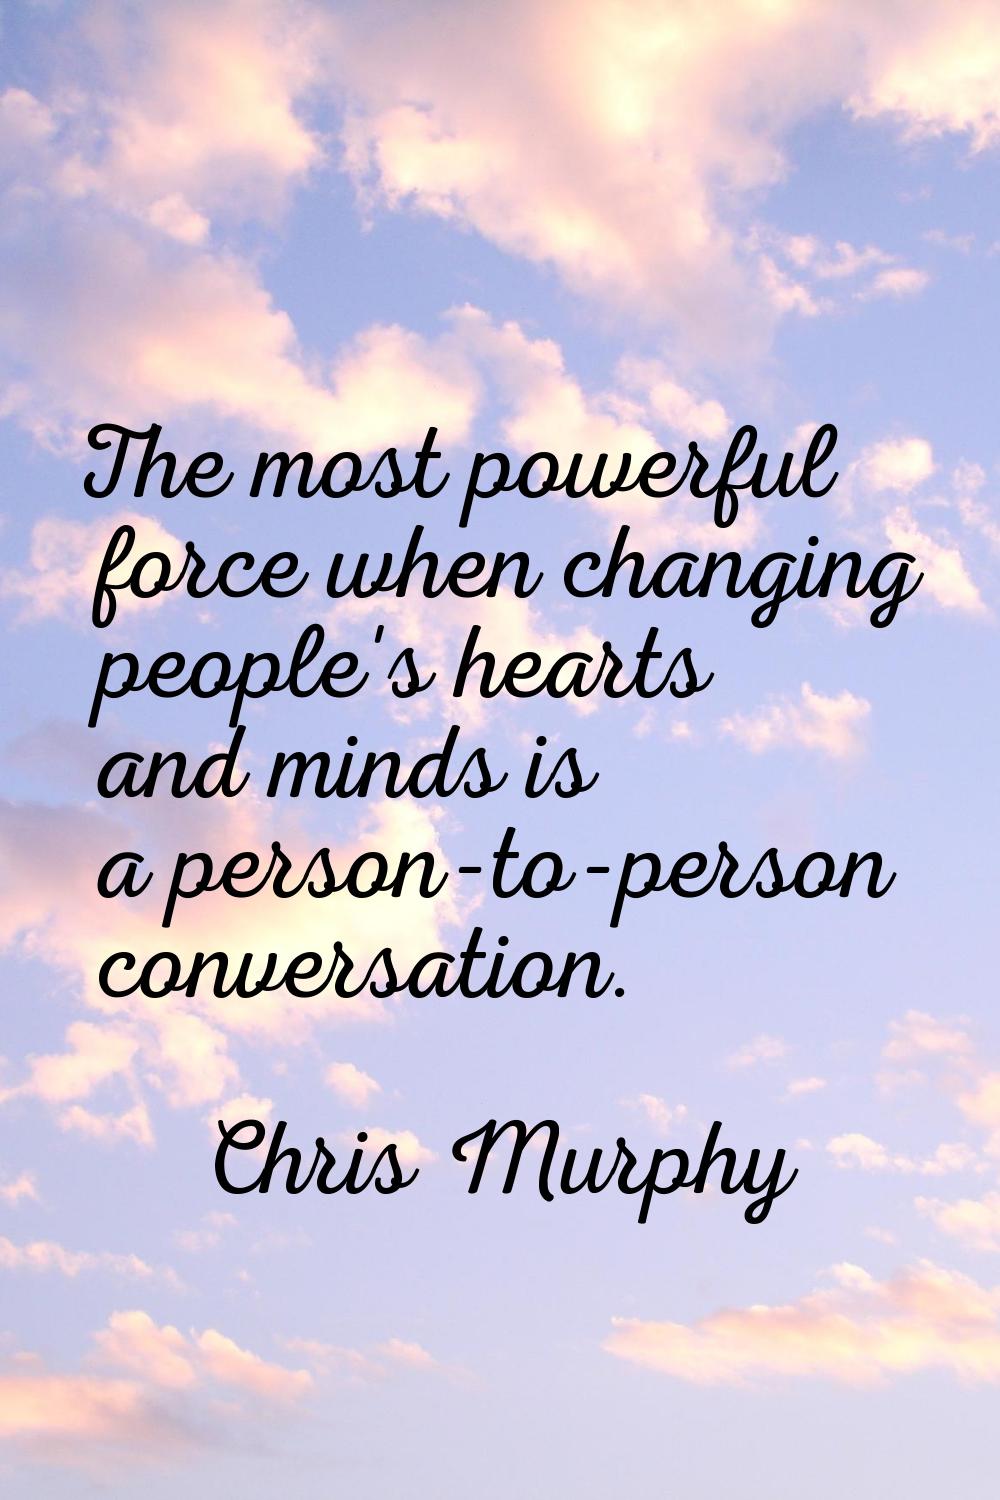 The most powerful force when changing people's hearts and minds is a person-to-person conversation.